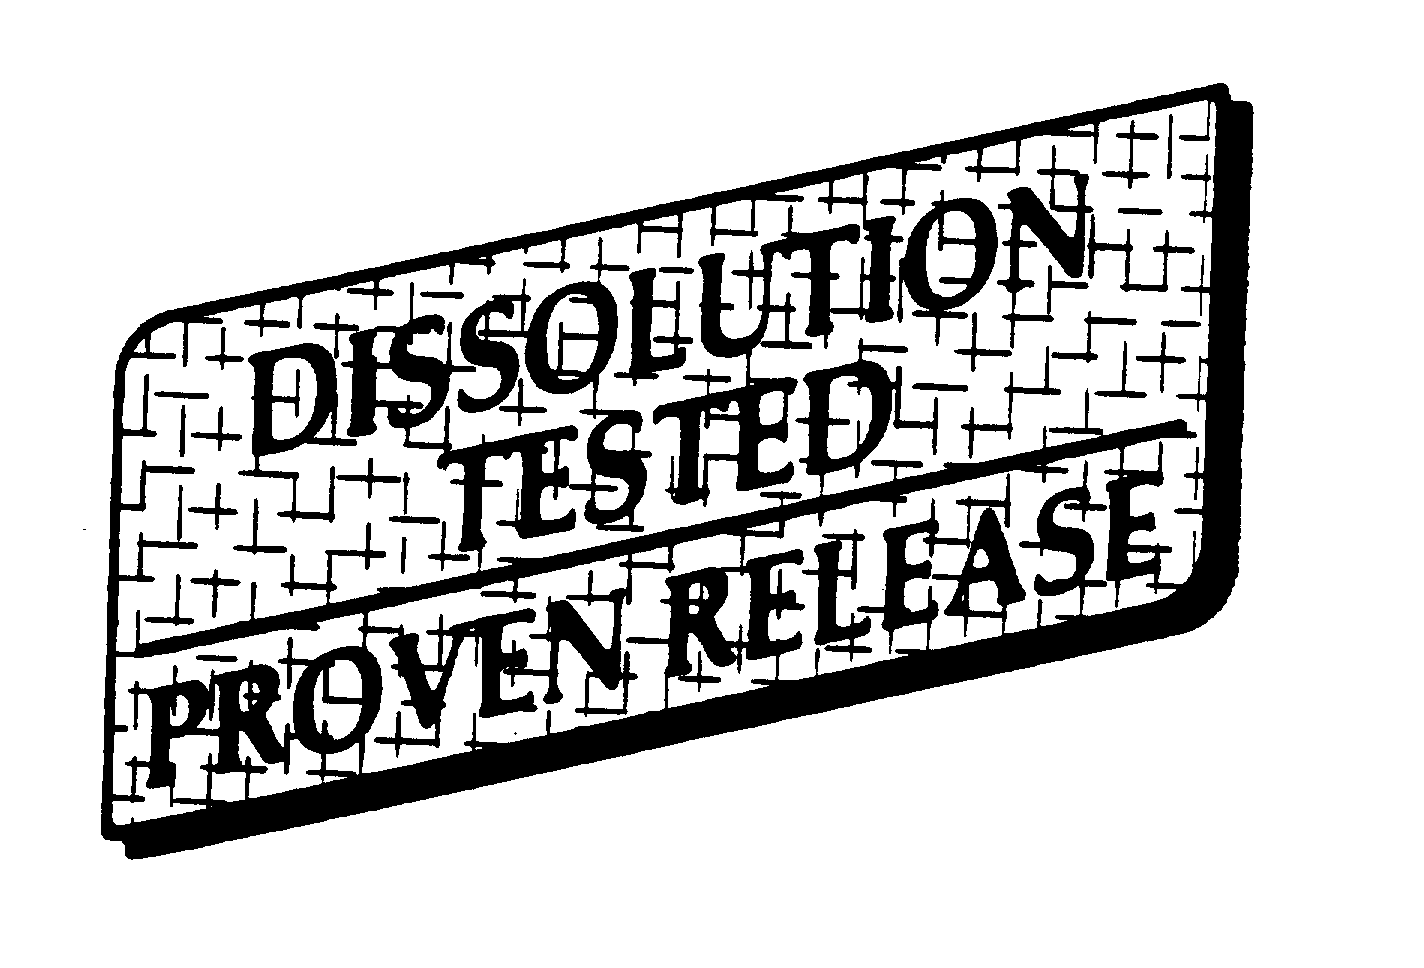  DISSOLUTION TESTED PROVEN RELEASE